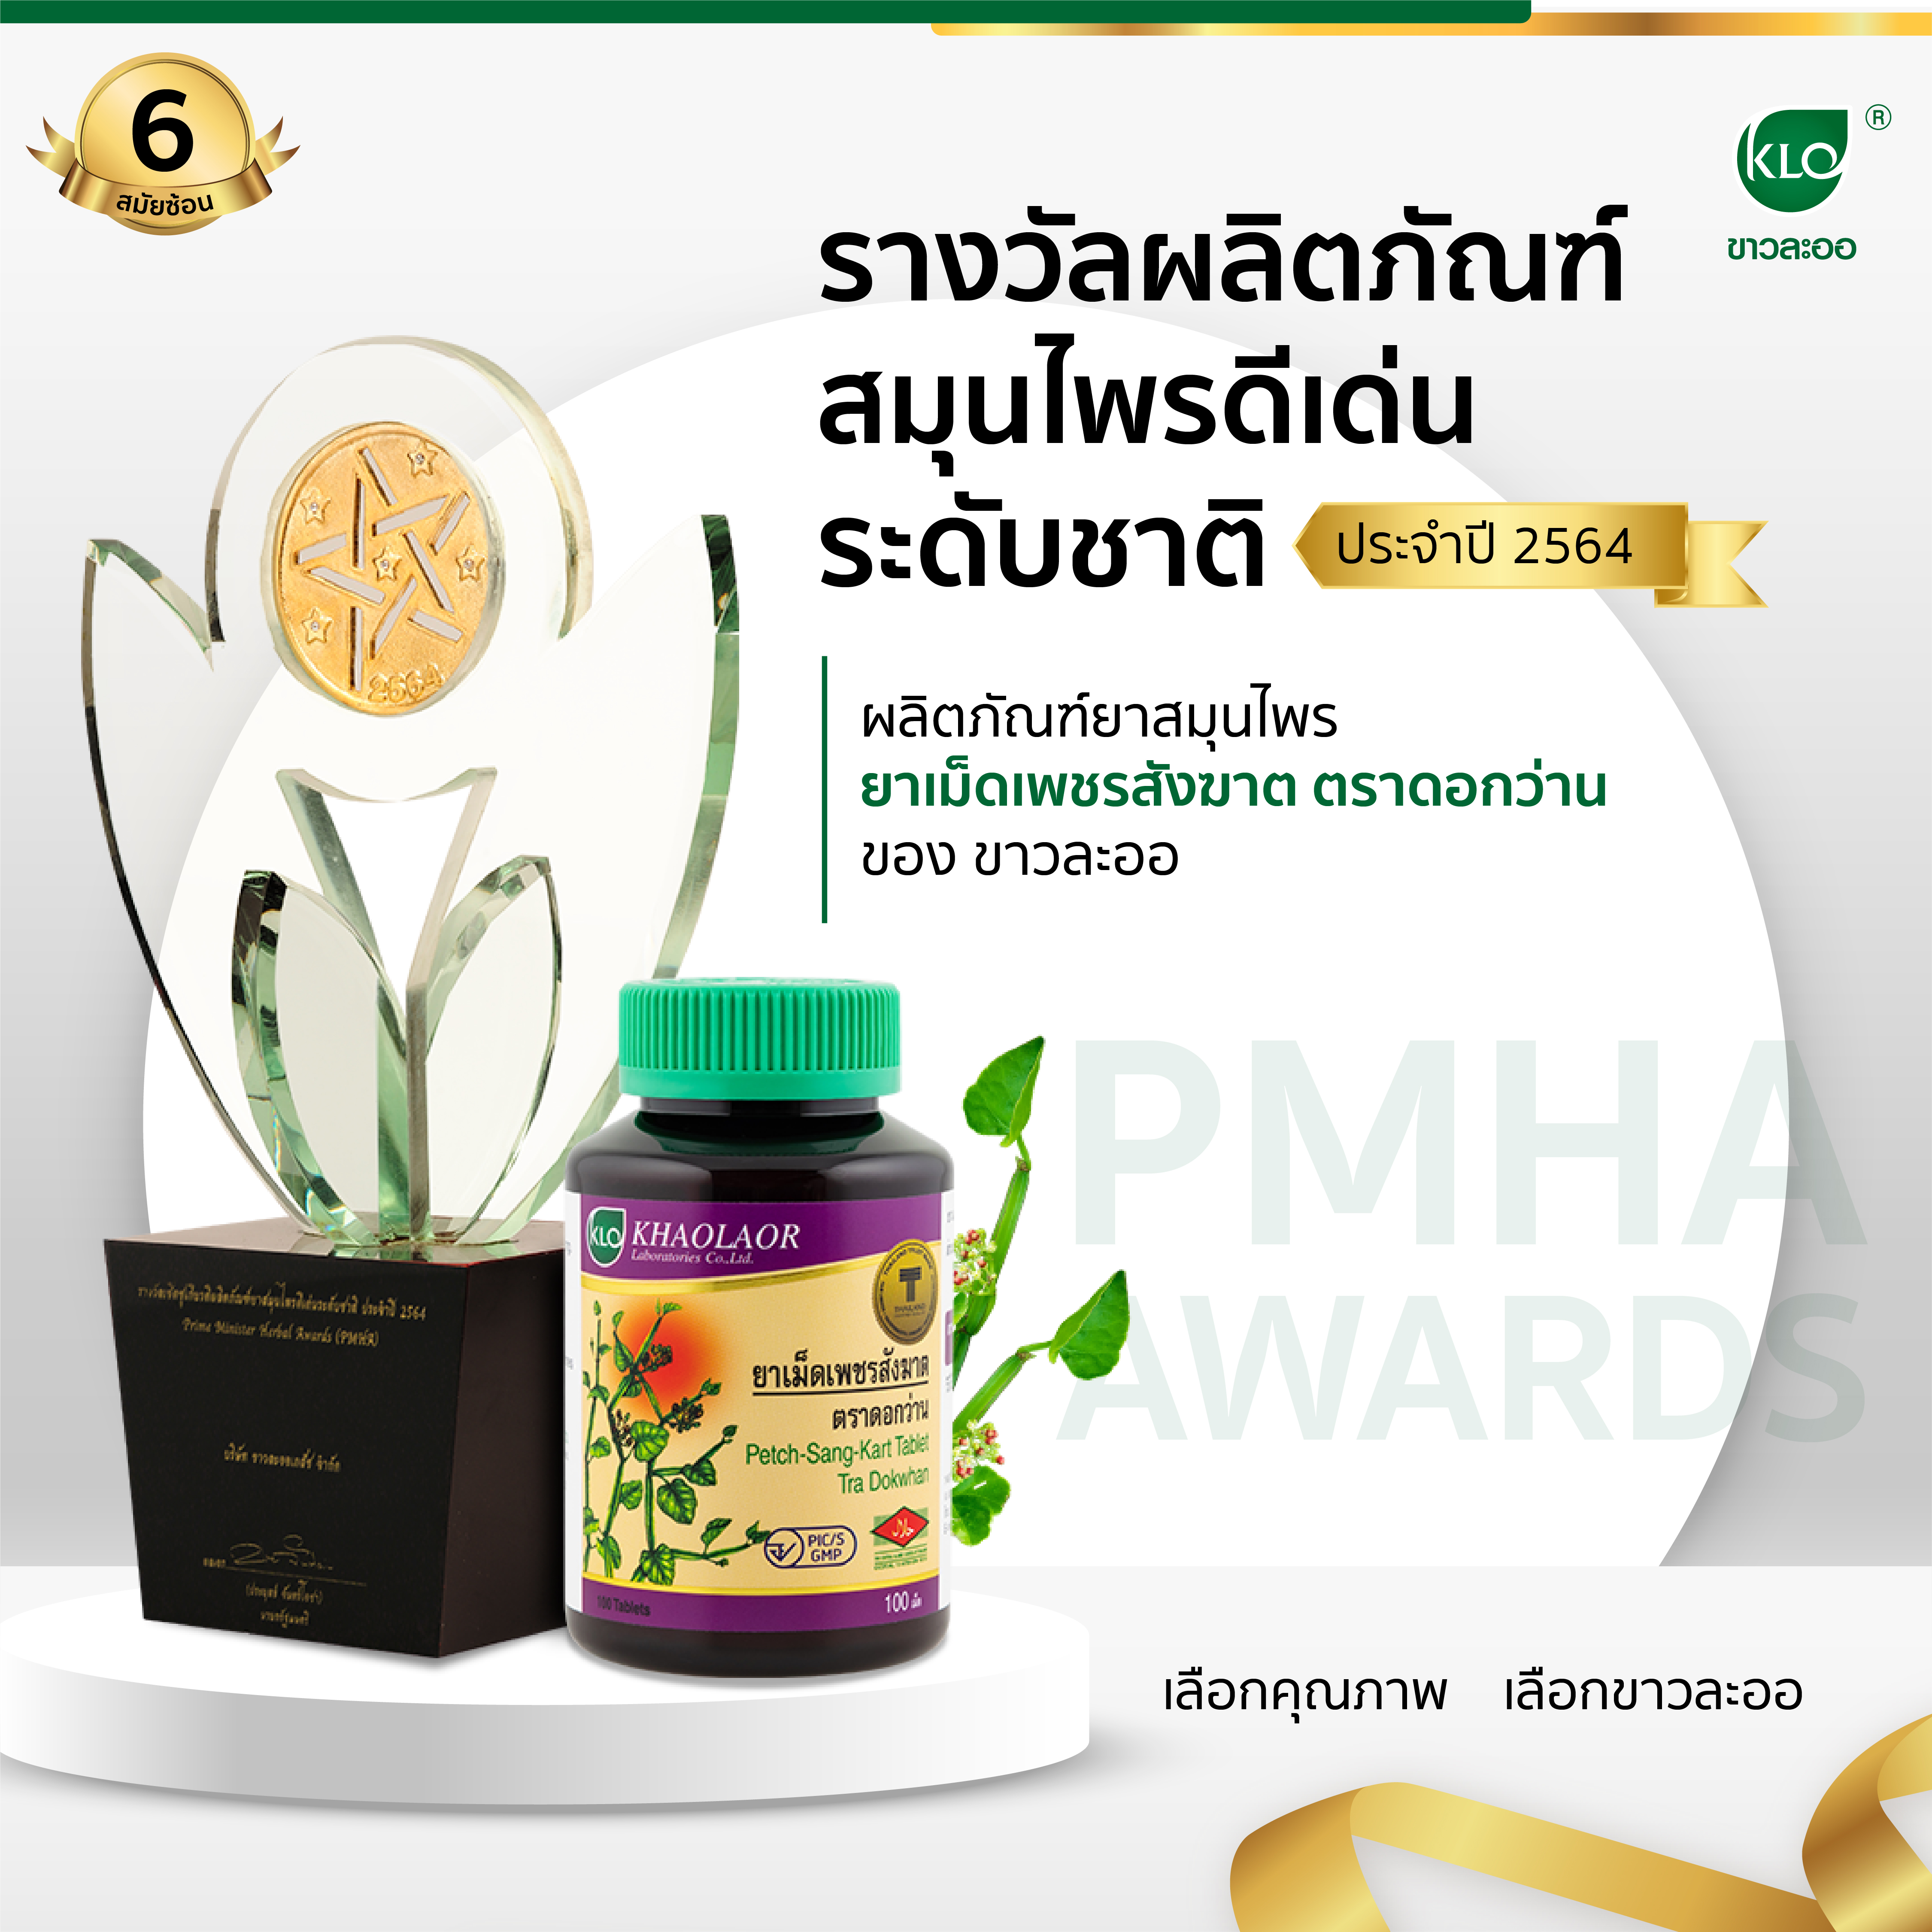 National Outstanding Herbal Product Award 2021, Herbal Medicine Products Kao La-or brand of Cissus quadrangularis pills, Dokwan brand